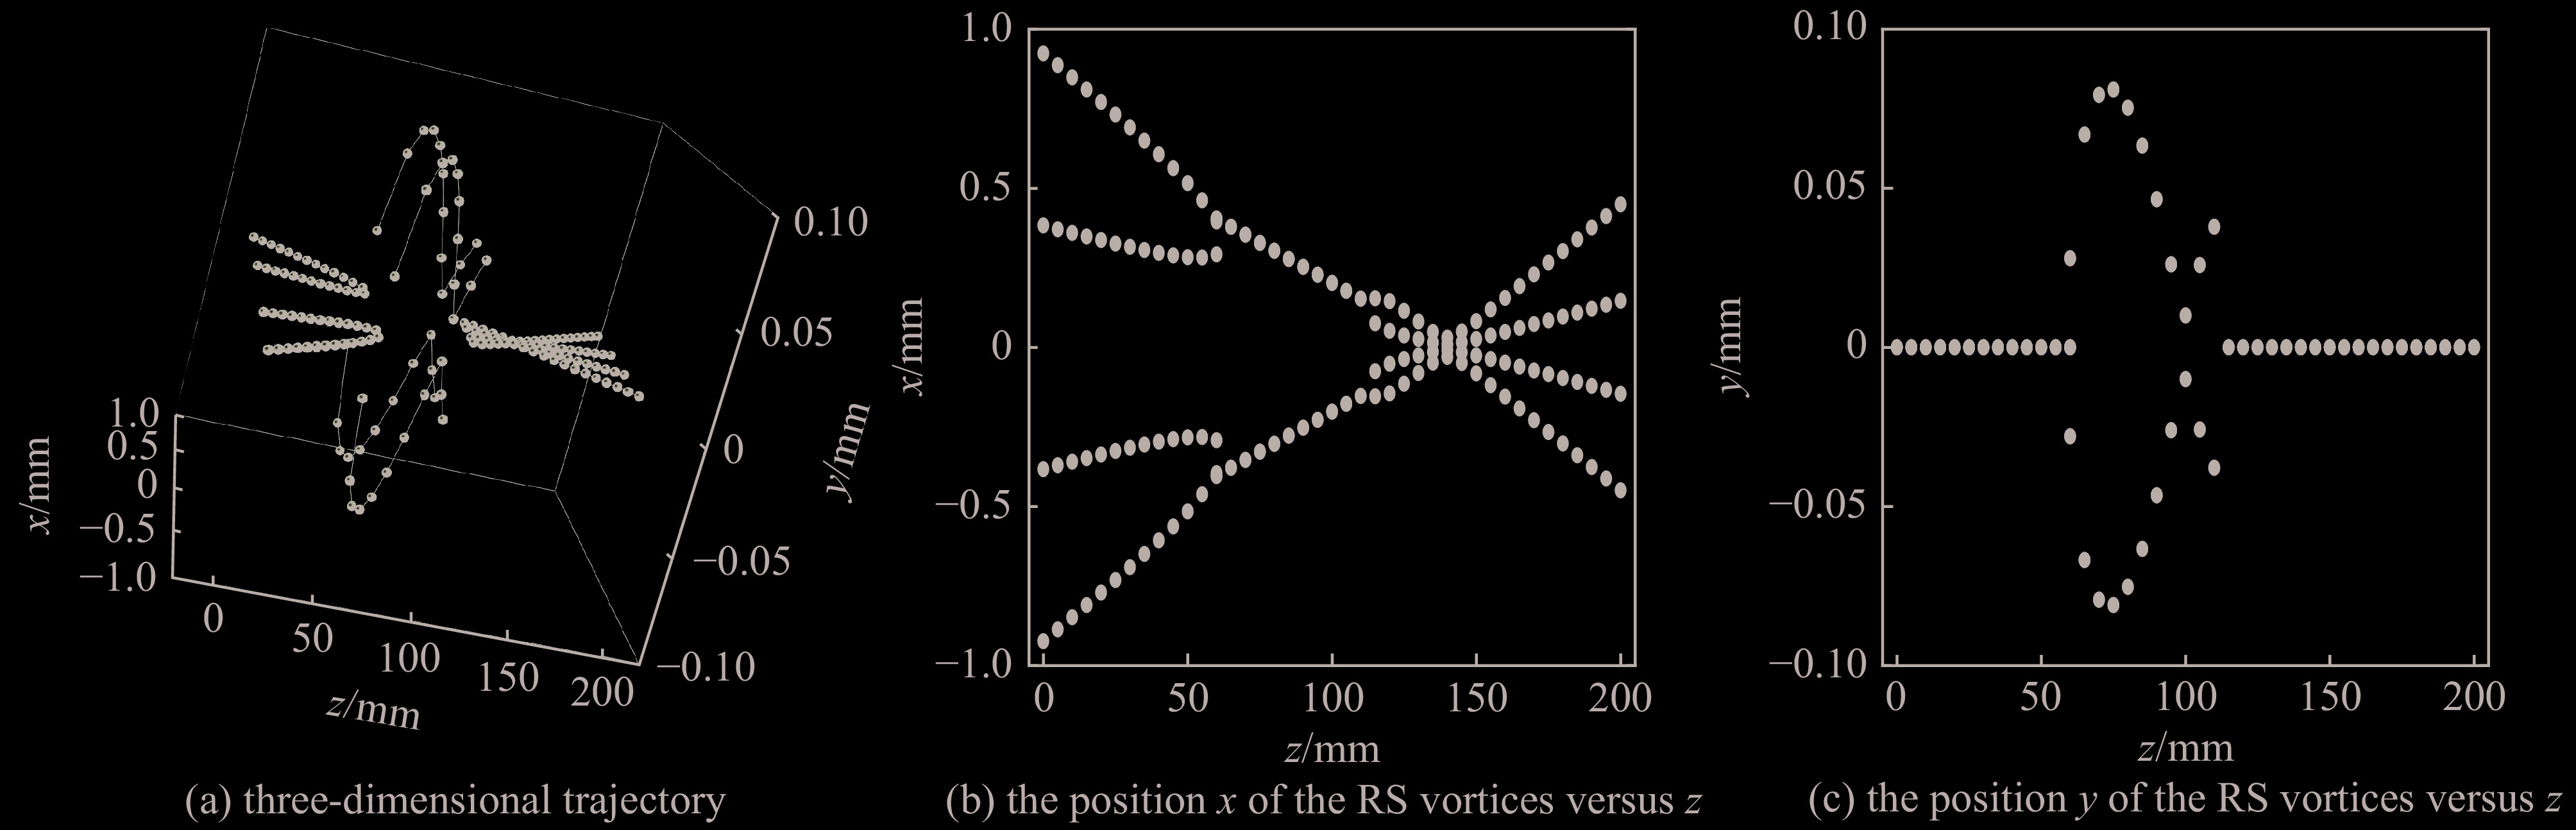 Positions of the RS vortices versus z